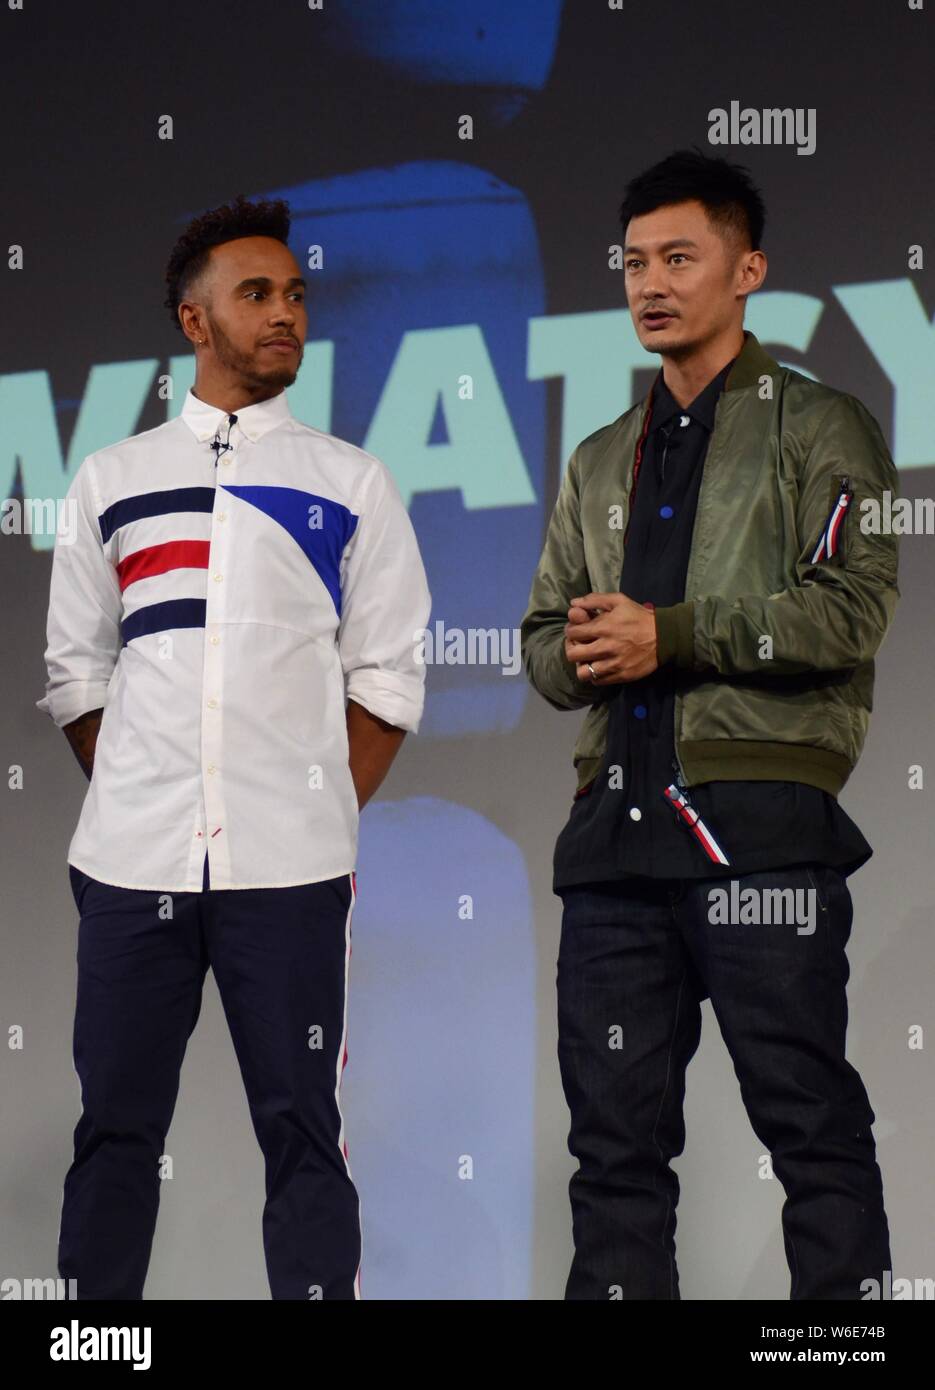 Mercedes' British F1 driver Lewis Hamilton, left, Hong Kong singer and  actor Shawn Yue, attend a promotional event by fashion brand Tommy Hilfiger  in Stock Photo - Alamy